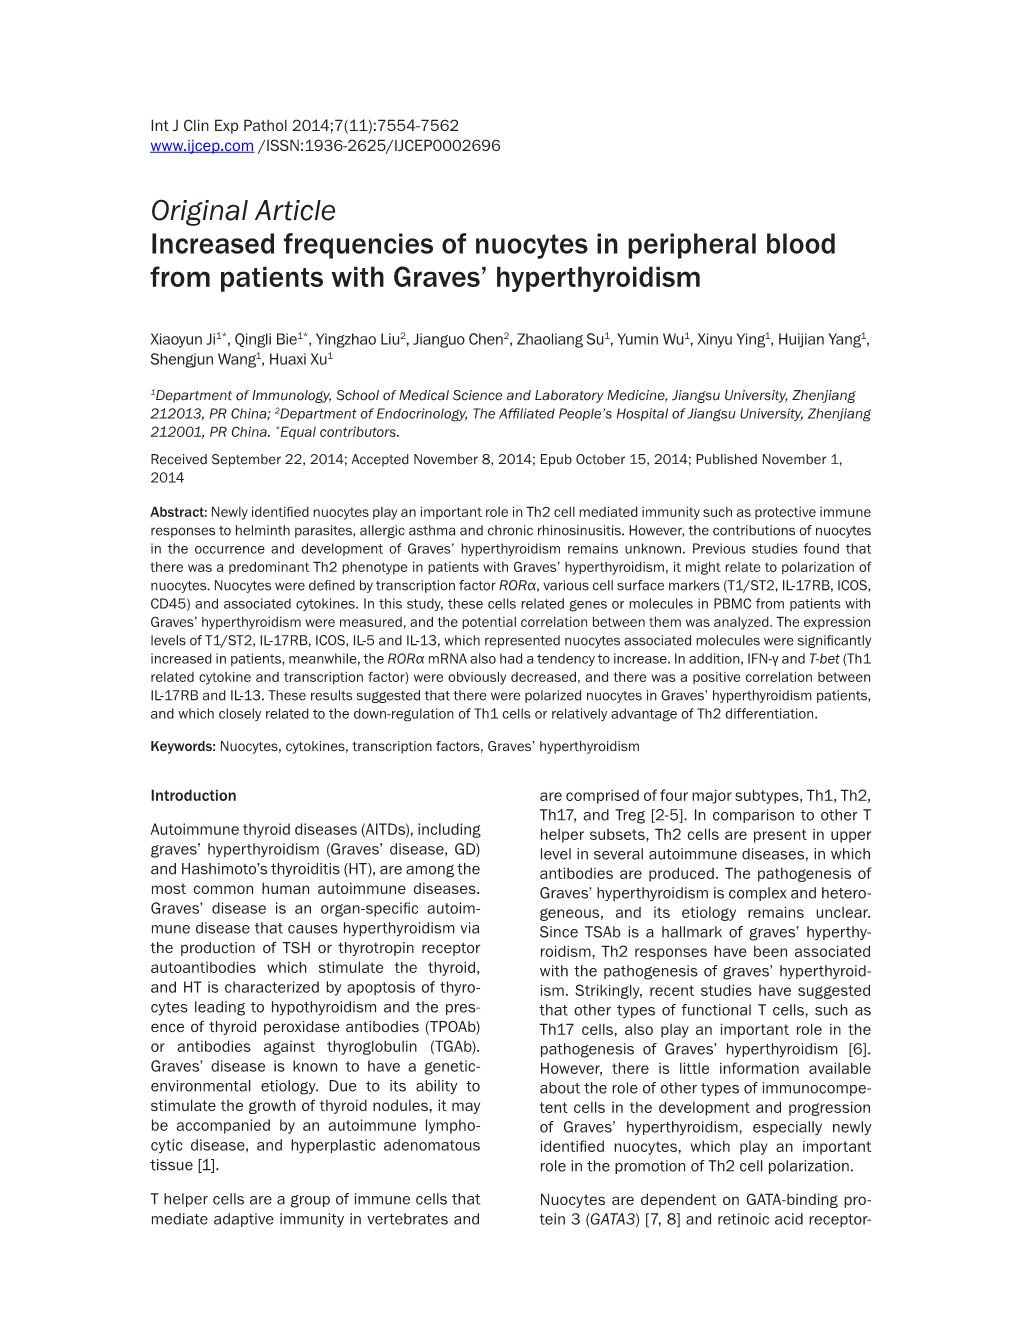 Original Article Increased Frequencies of Nuocytes in Peripheral Blood from Patients with Graves’ Hyperthyroidism